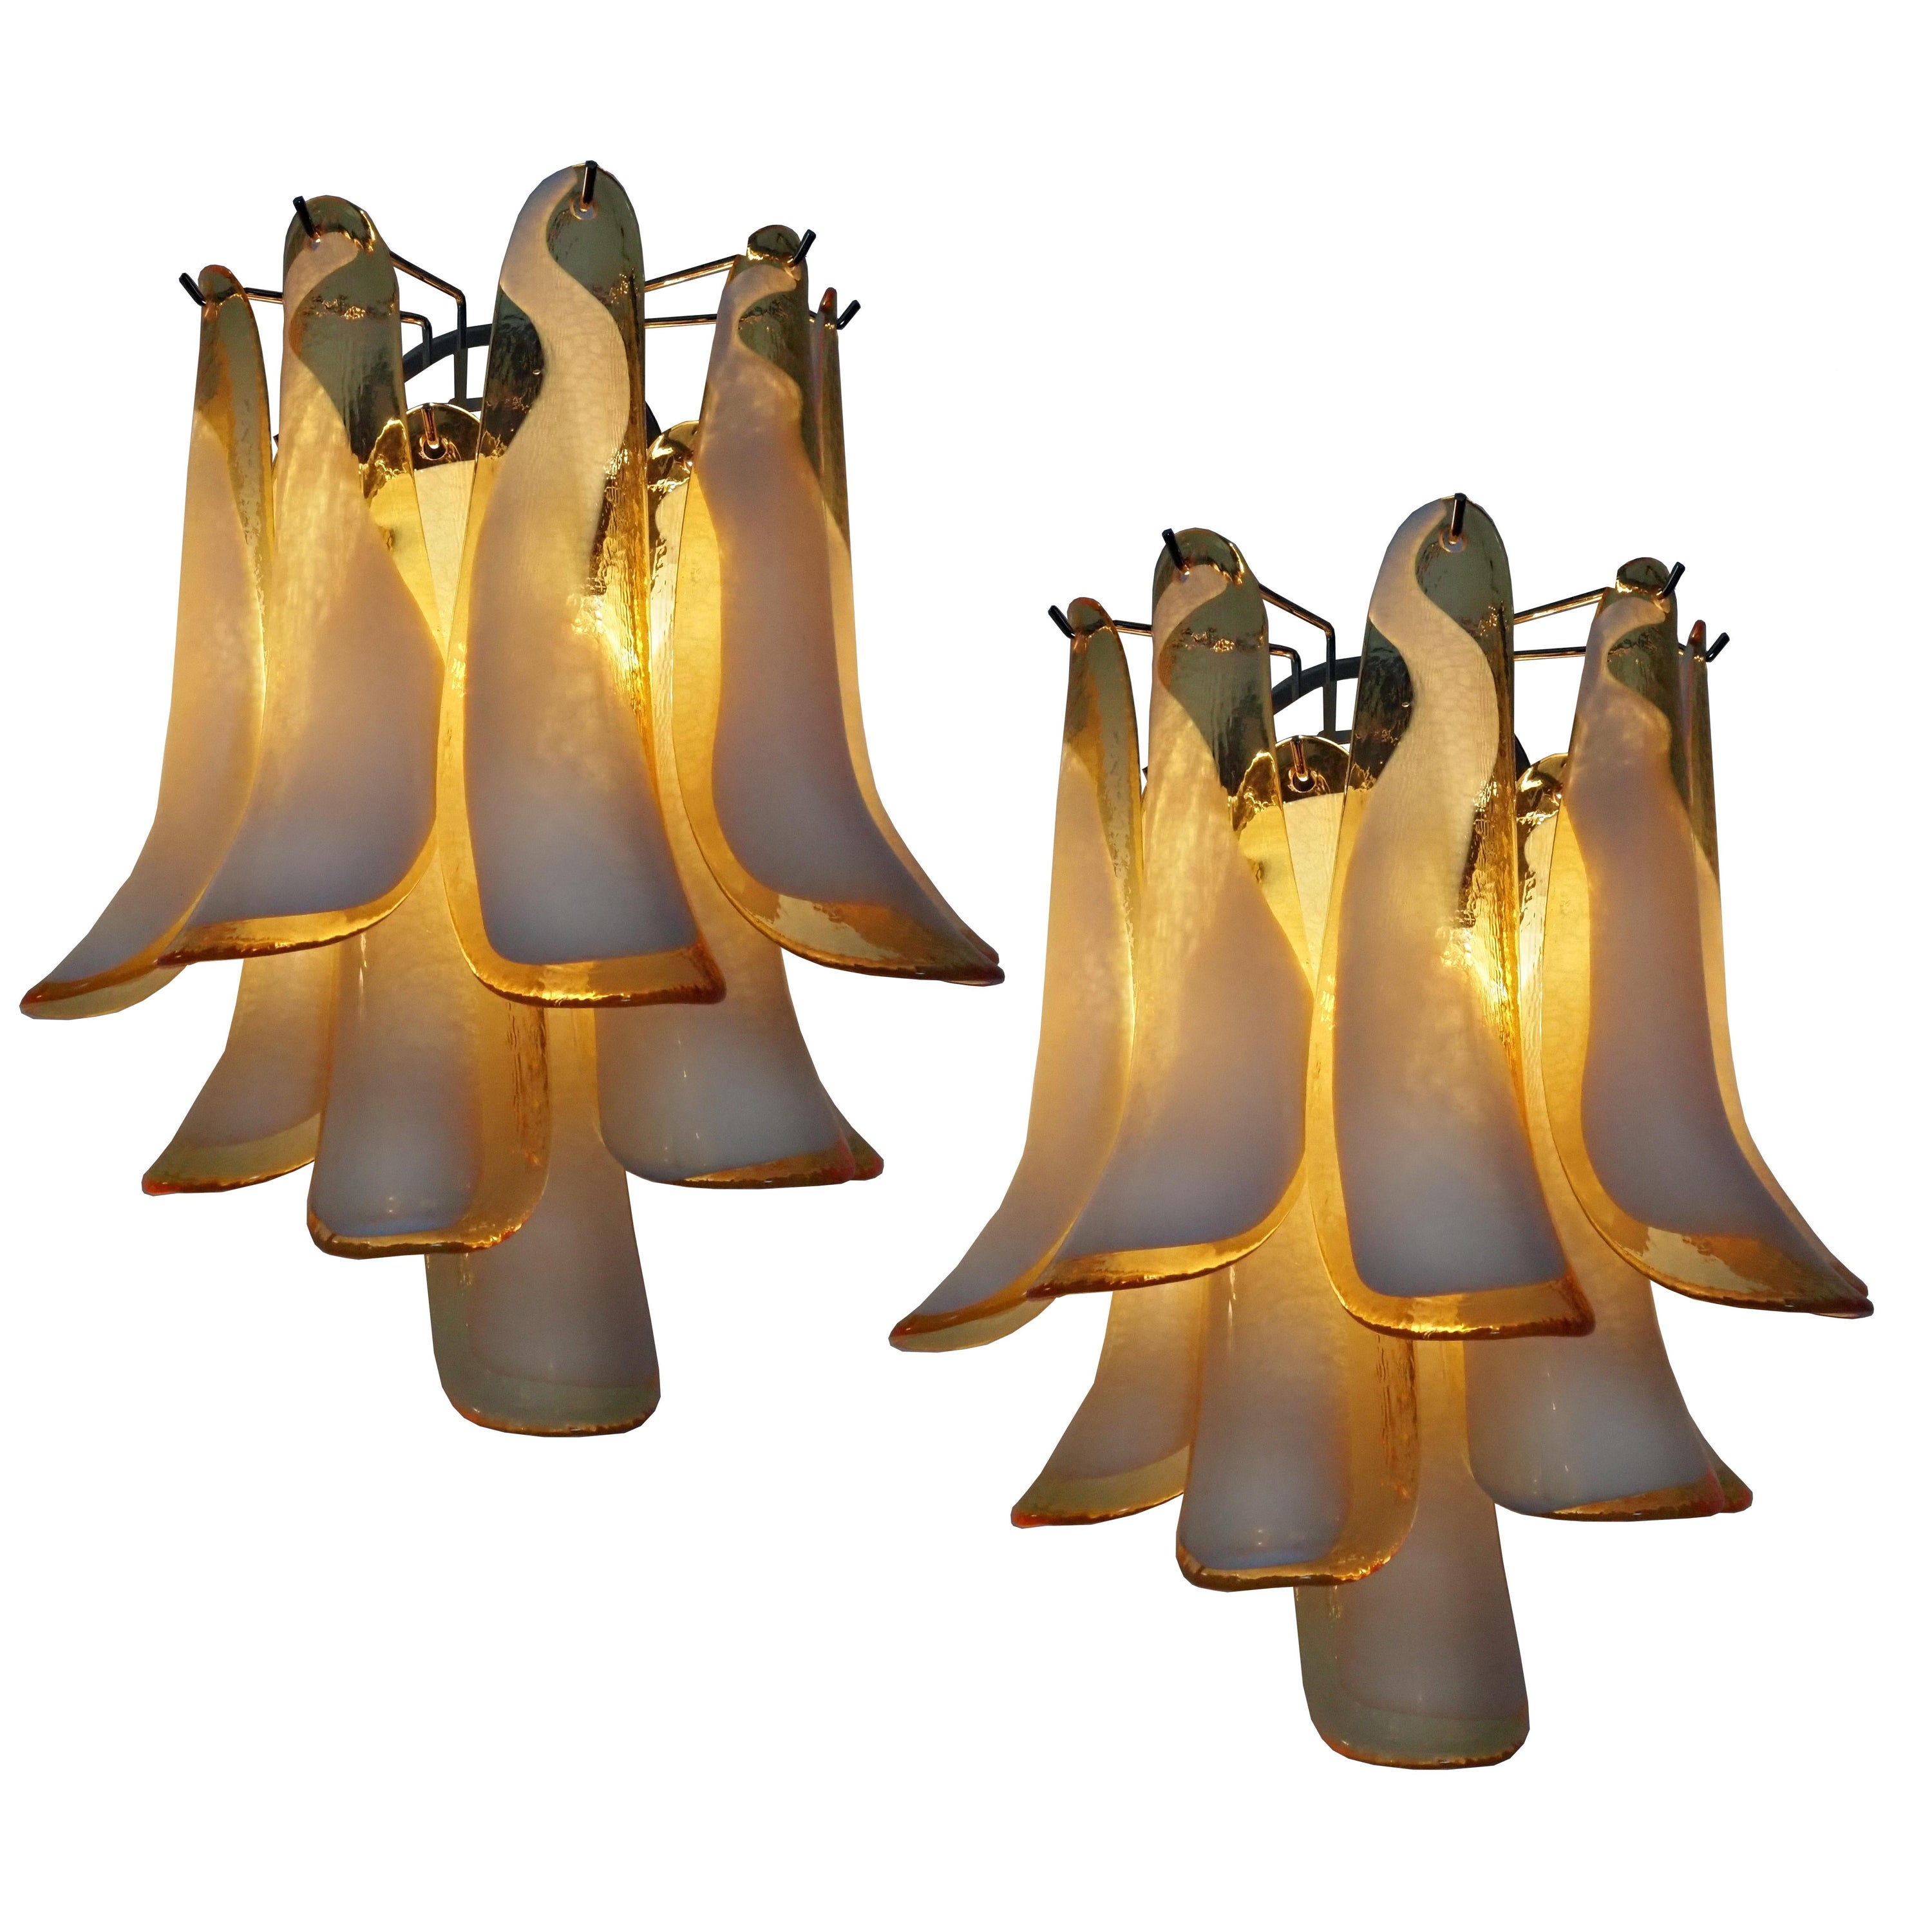 Pair of Vintage Italian Murano wall lights in the manner of Mazzega – caramel lattimo glass petals
Pair of Vintage Italian Murano appliques in the manner of Mazzega. Wall lights have 10 caramel lattimo glass petals (for each applique) in a chrome